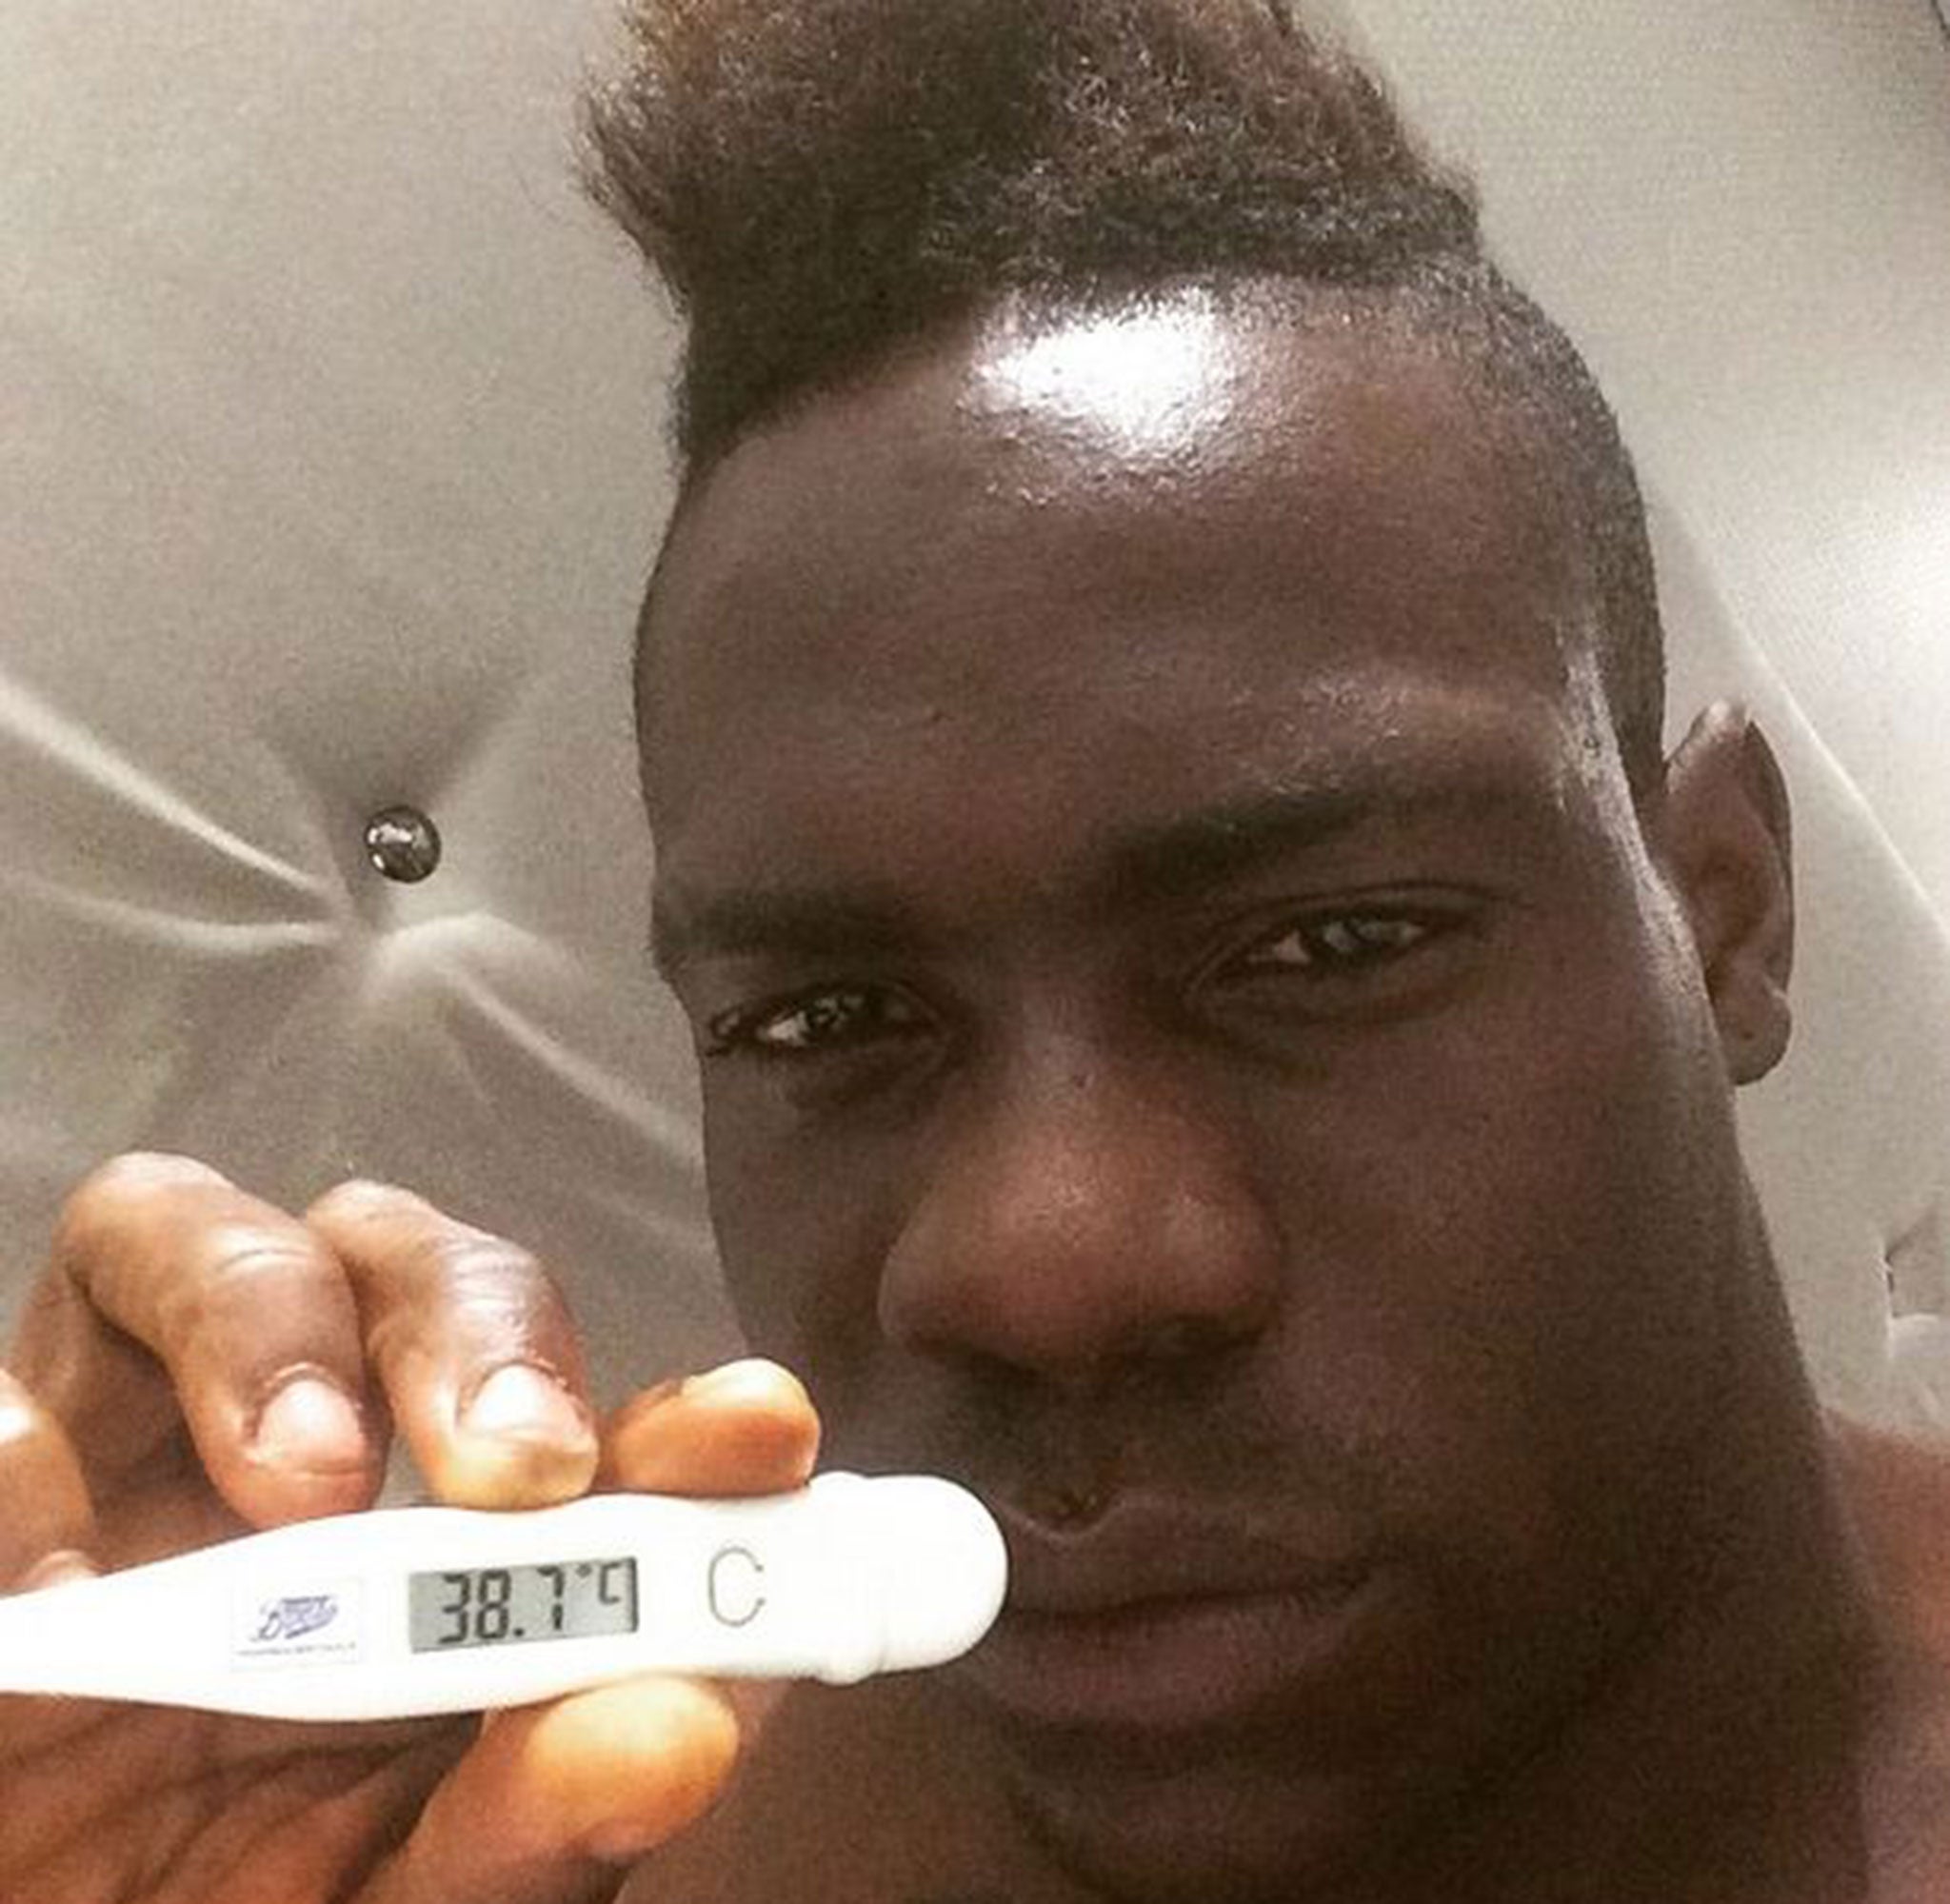 Mario Balotelli posted this picture in response to criticism from Robbie Savage